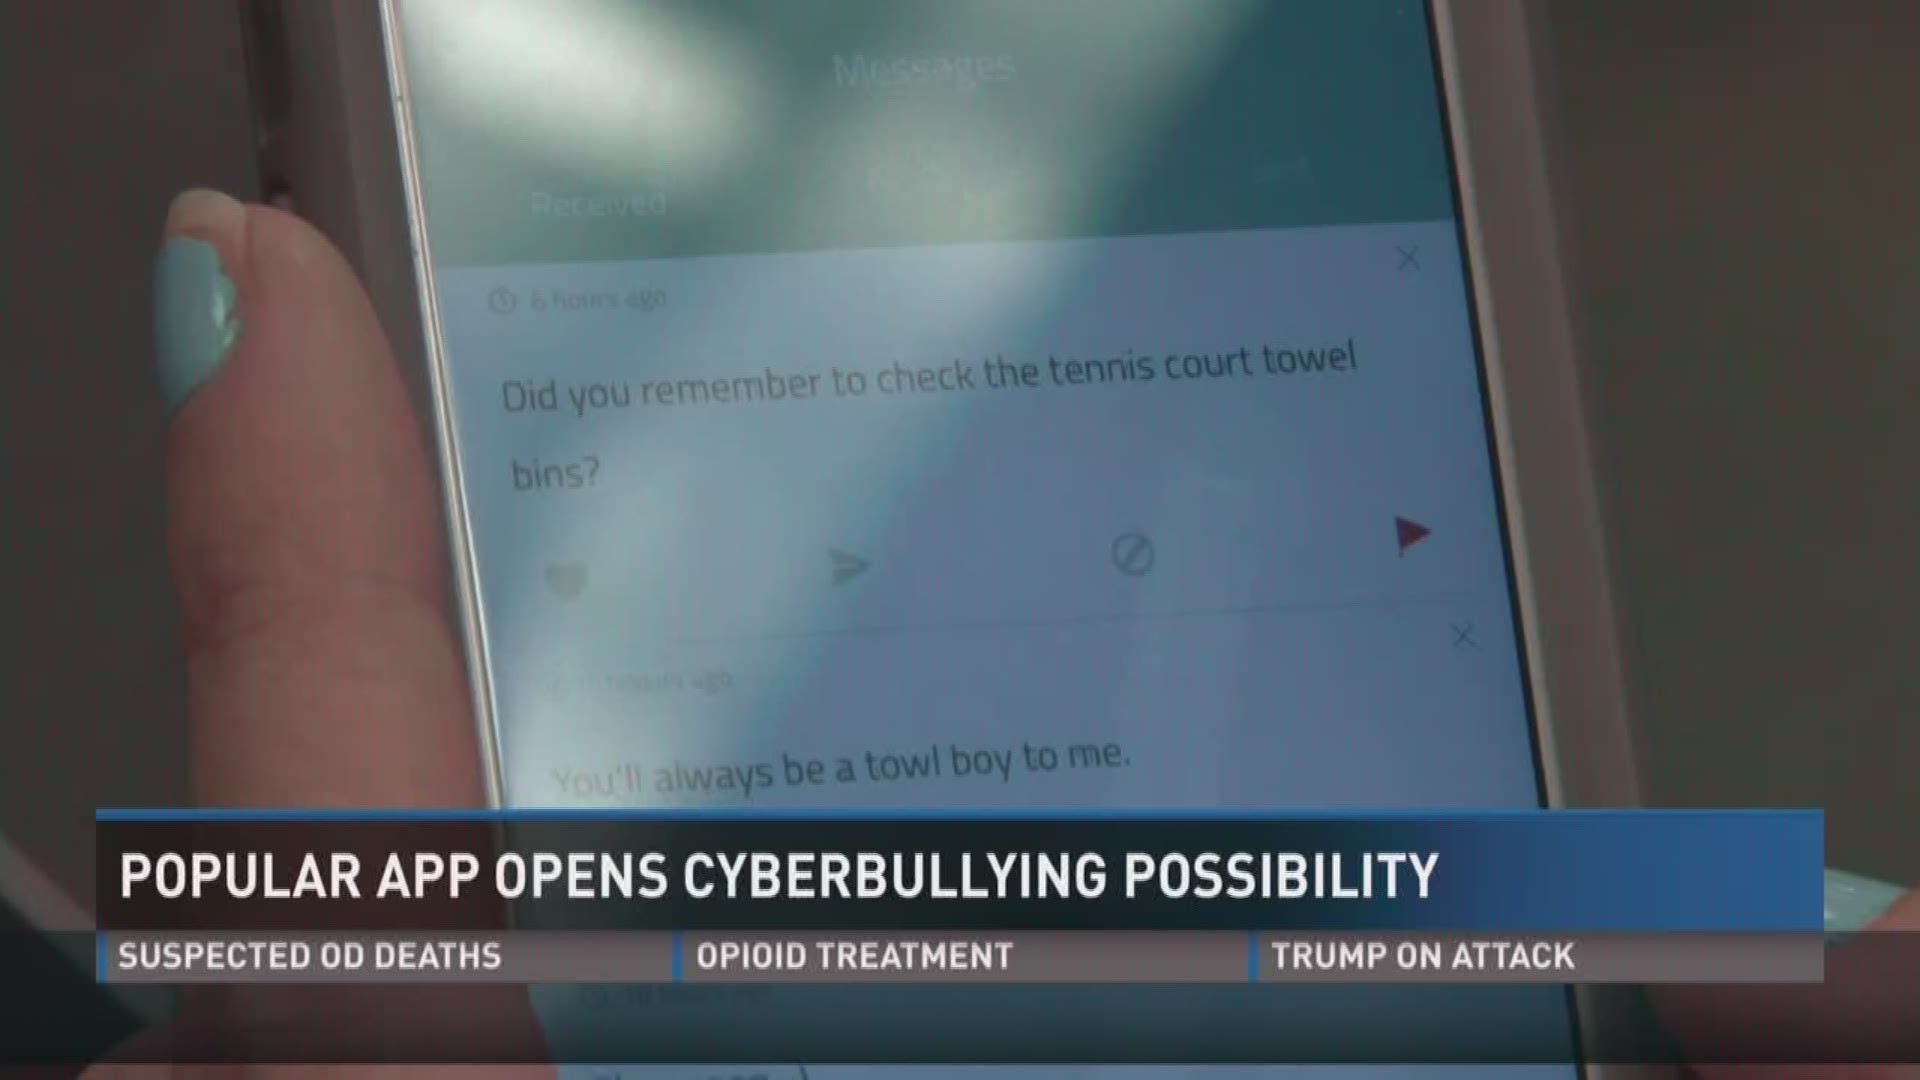 Aug. 15, 2017: Experts say a new app sweeping the internet is presenting a perfect platform for cyberbullying.